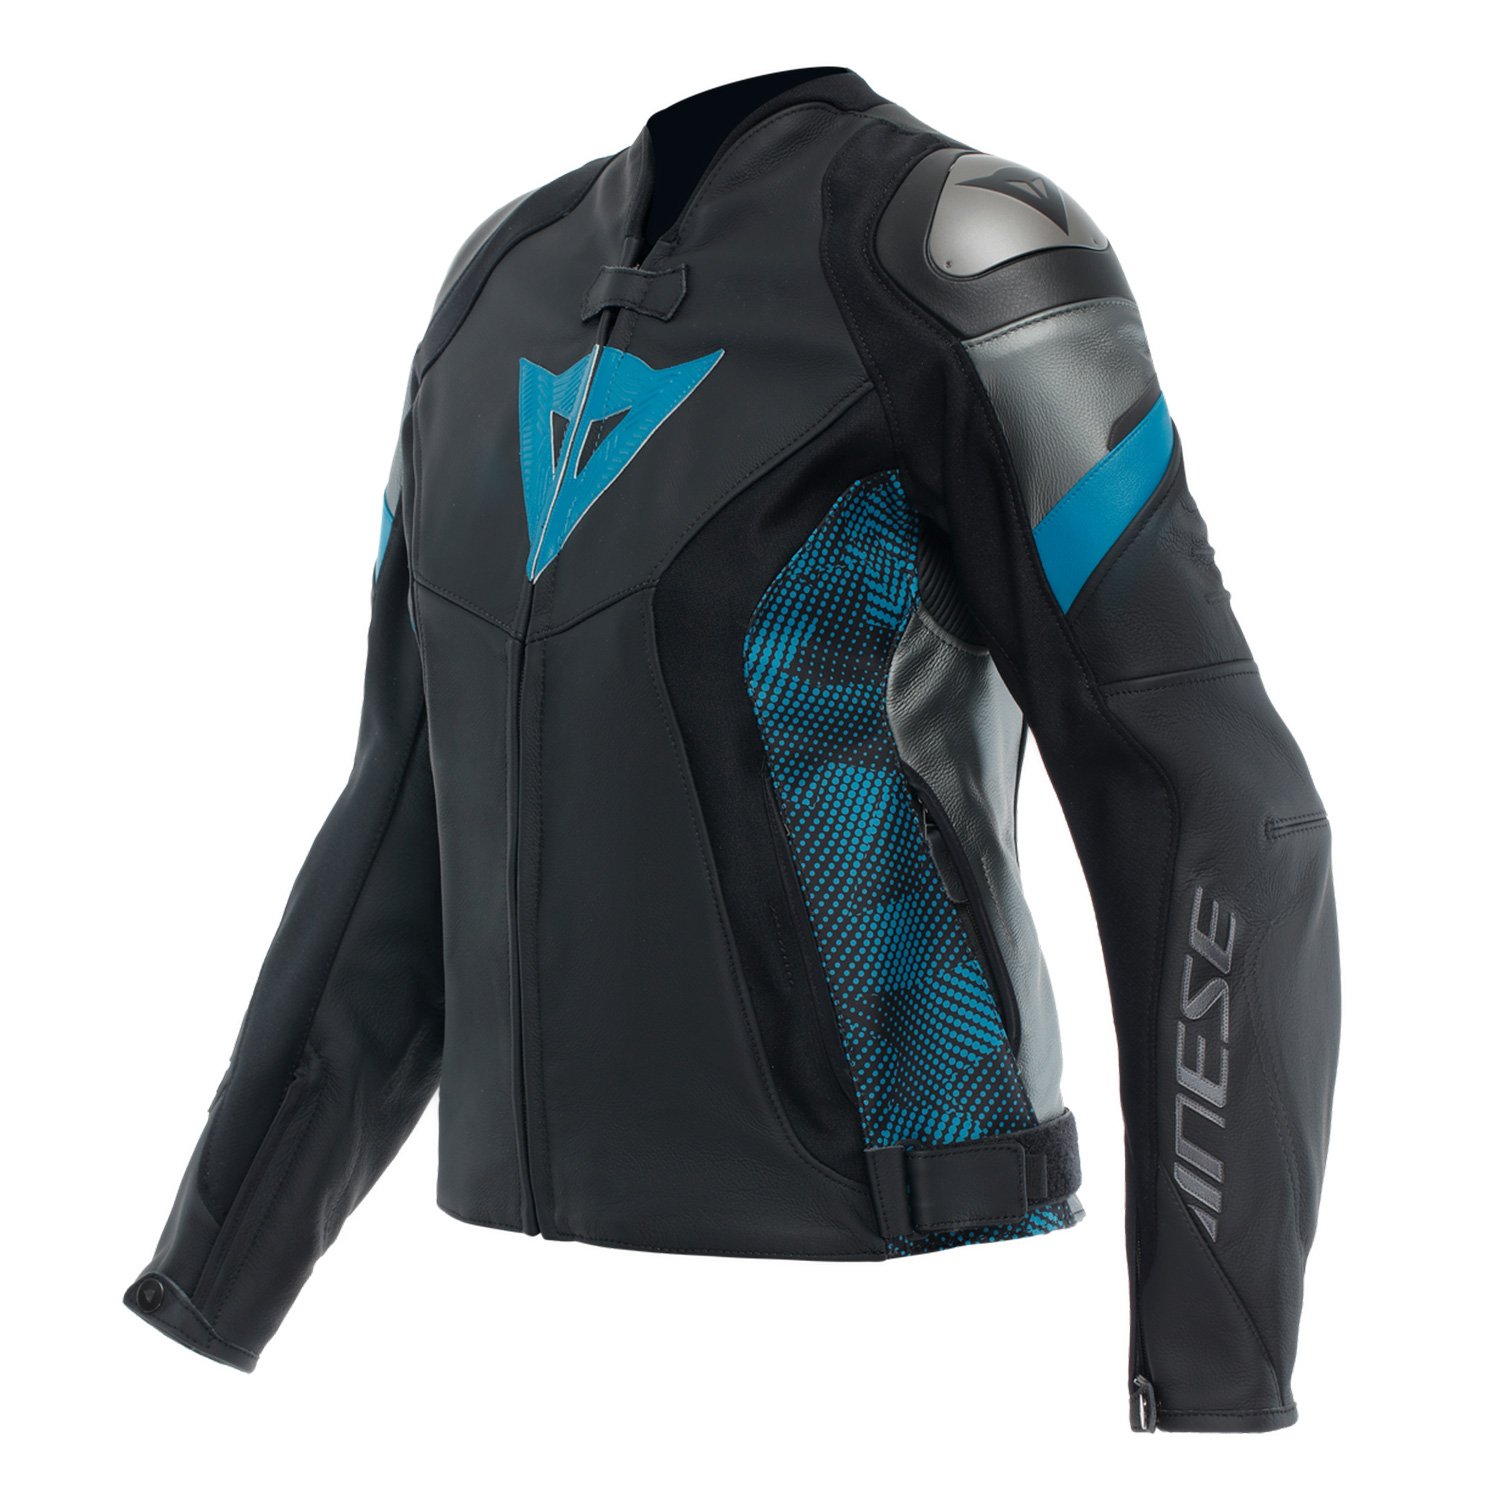 Image of Dainese Avro 5 Leather Jacket WMN Black Teal Anthracite Taille 52